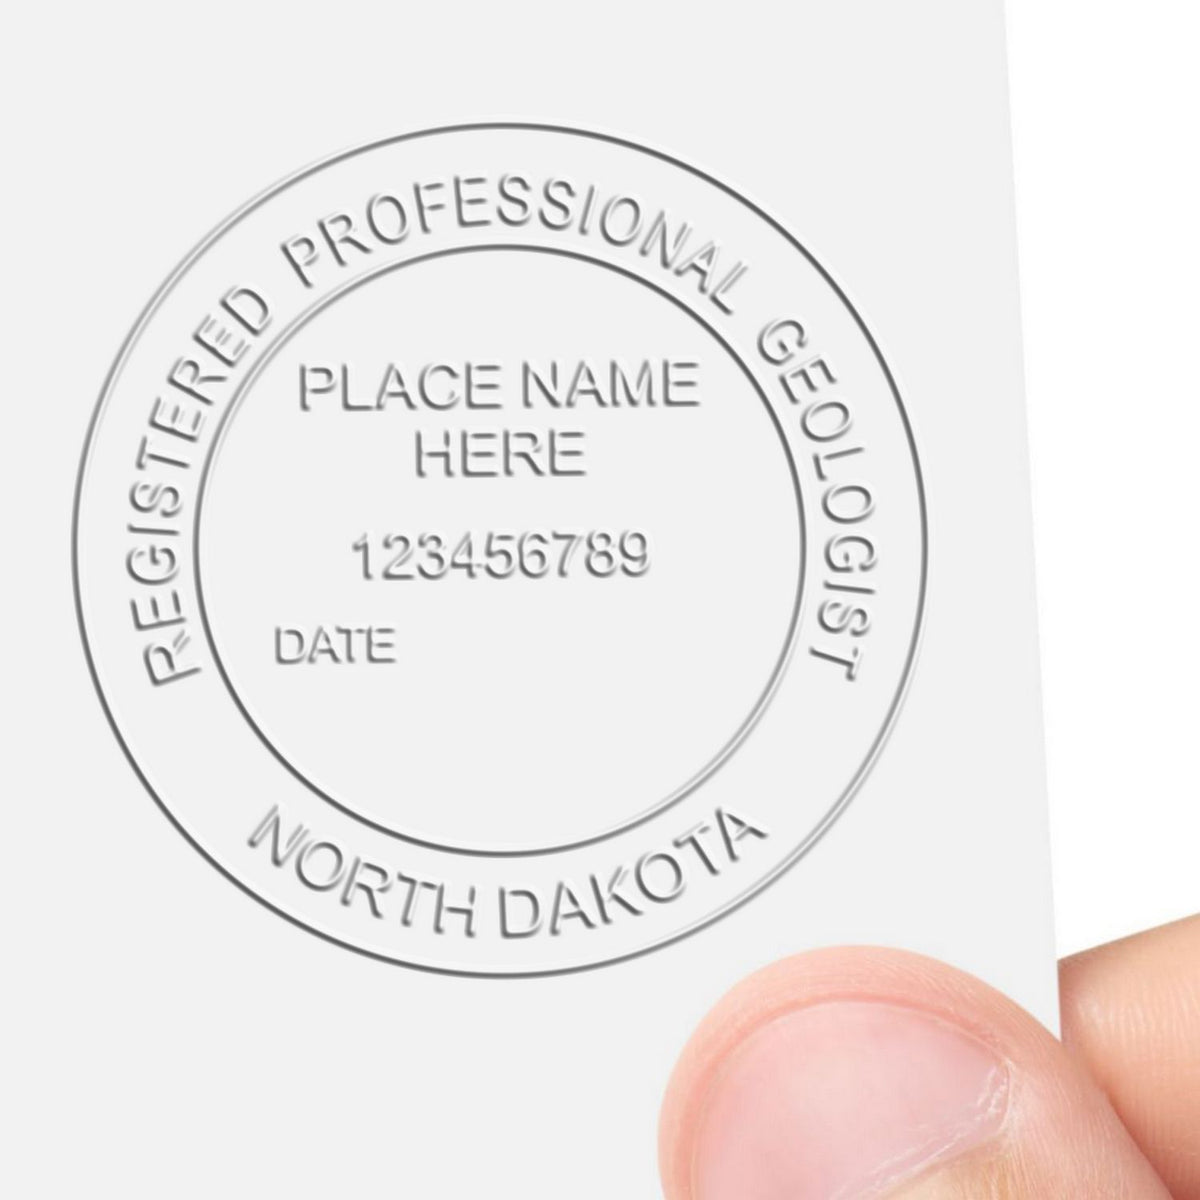 An in use photo of the Gift North Dakota Geologist Seal showing a sample imprint on a cardstock